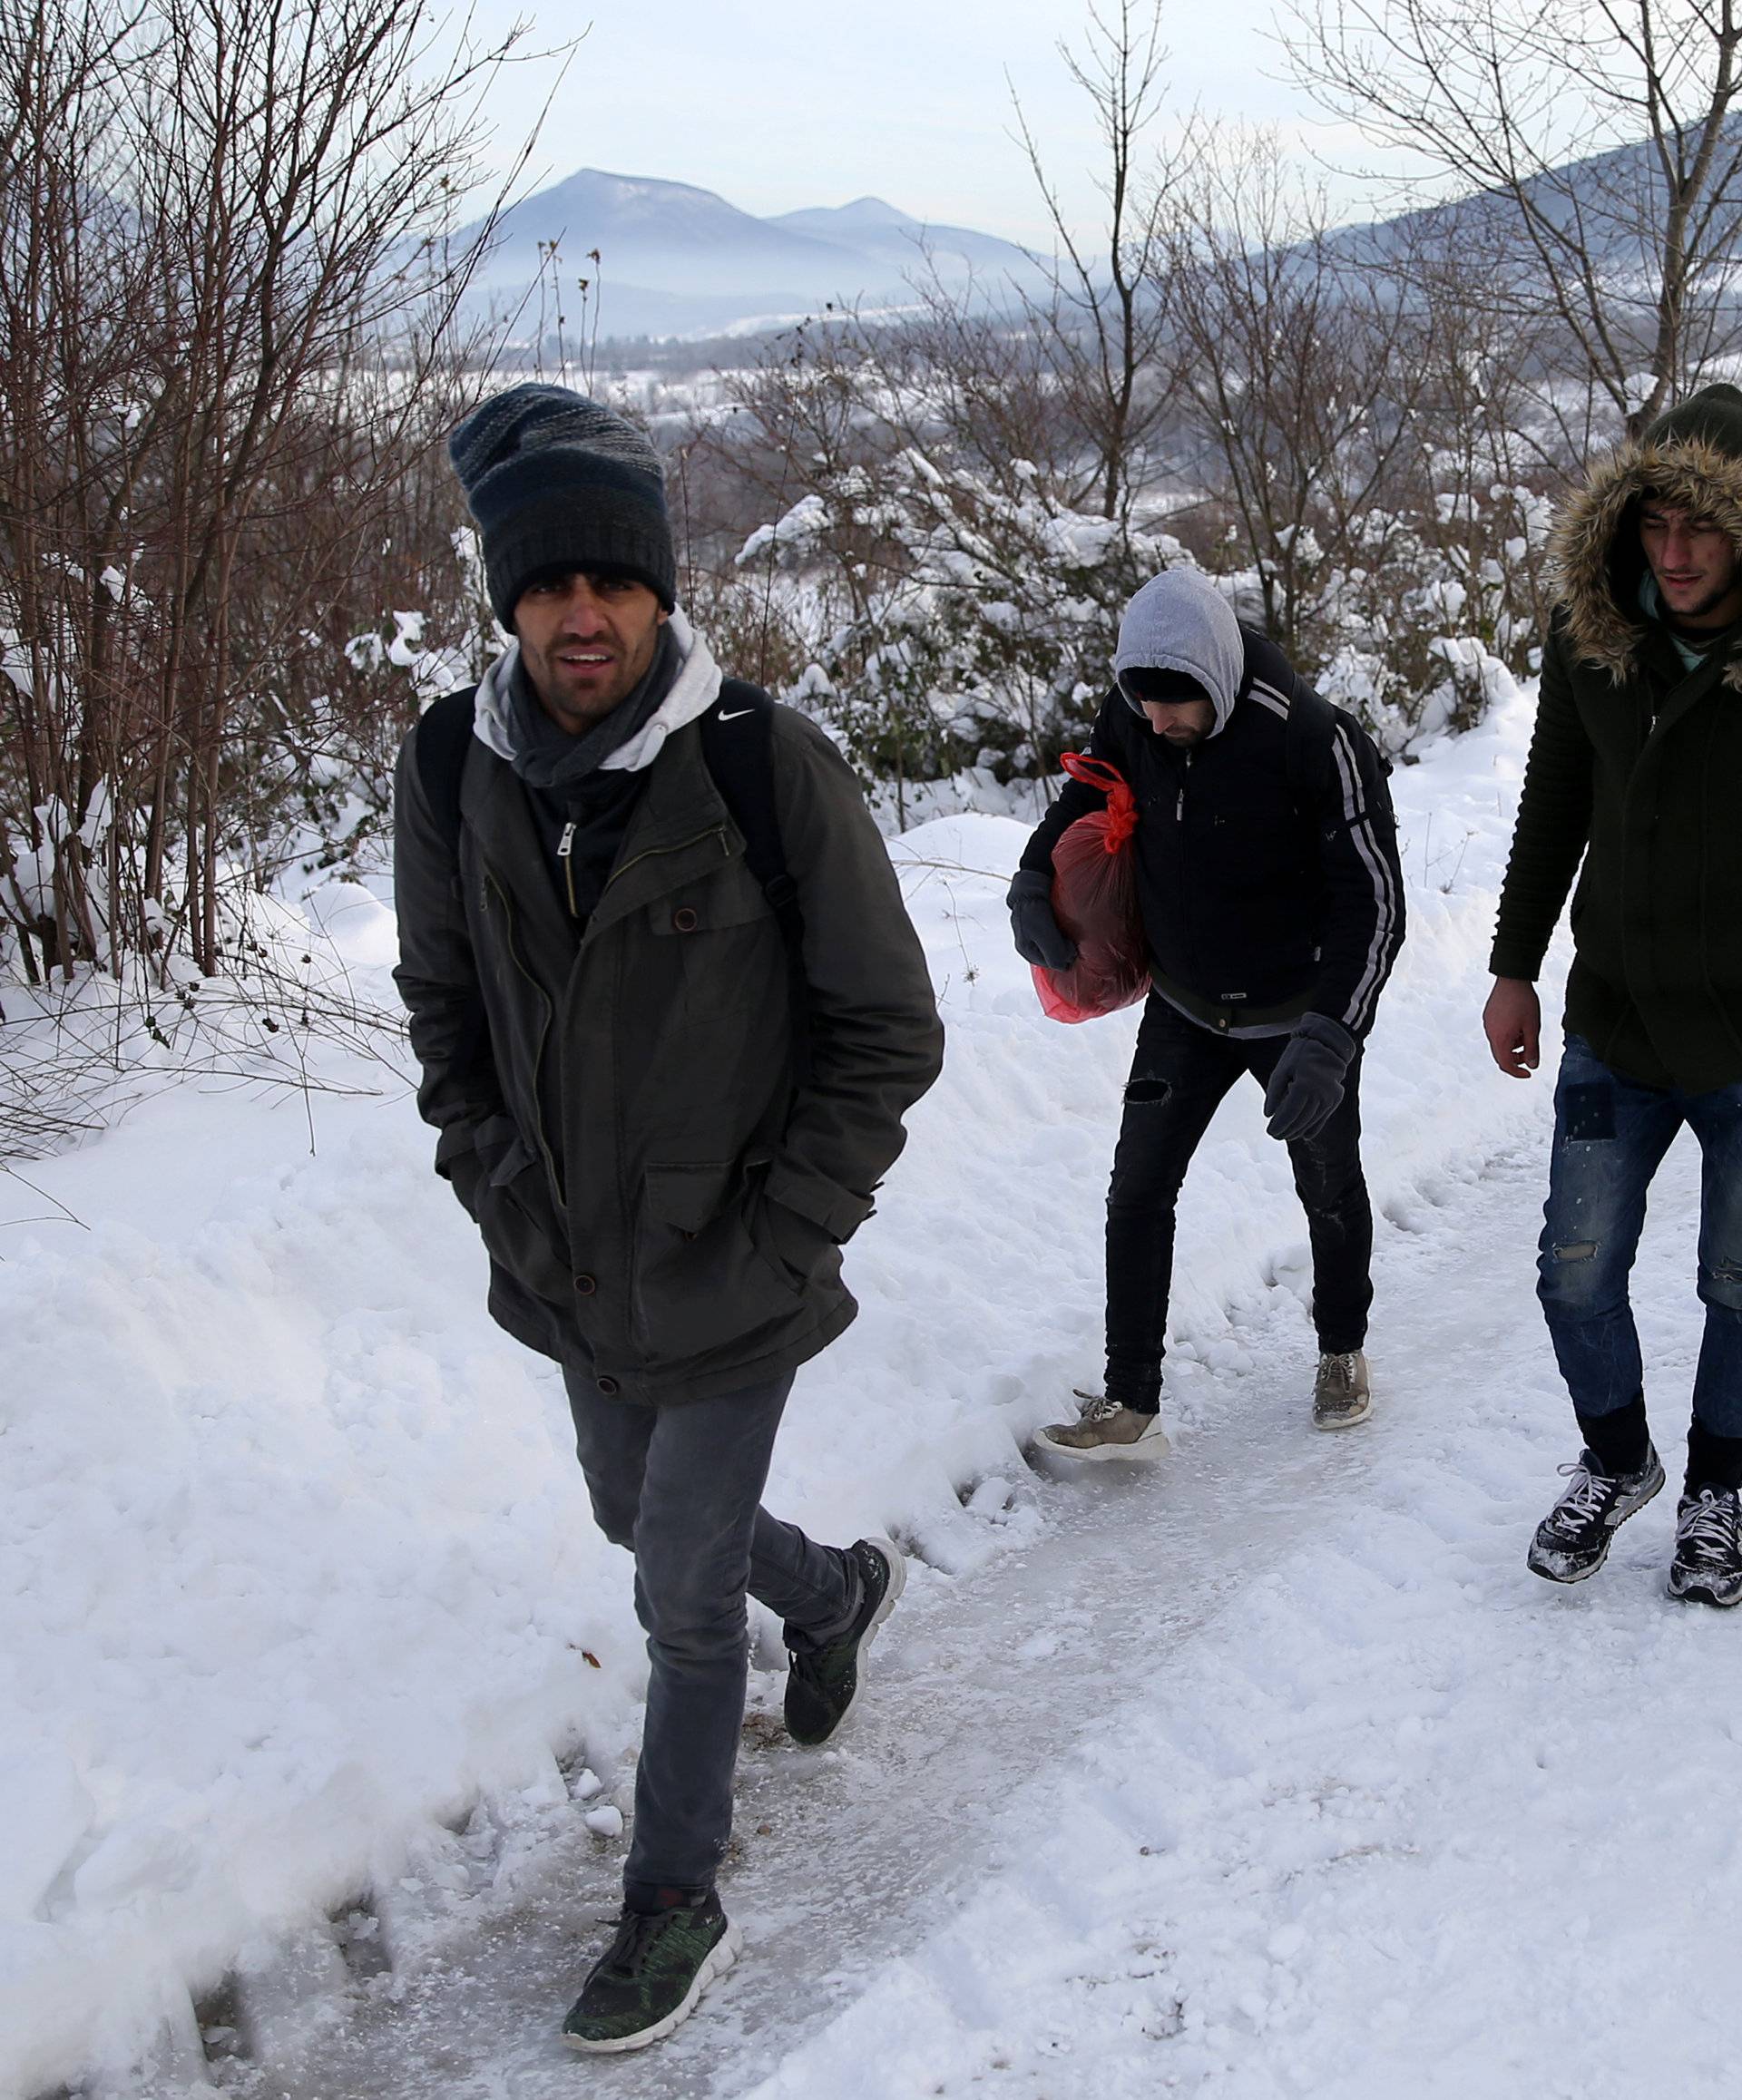 A group of migrants attempts to illegally cross the border into Croatia on the Pljesevica Mountain near Bihac